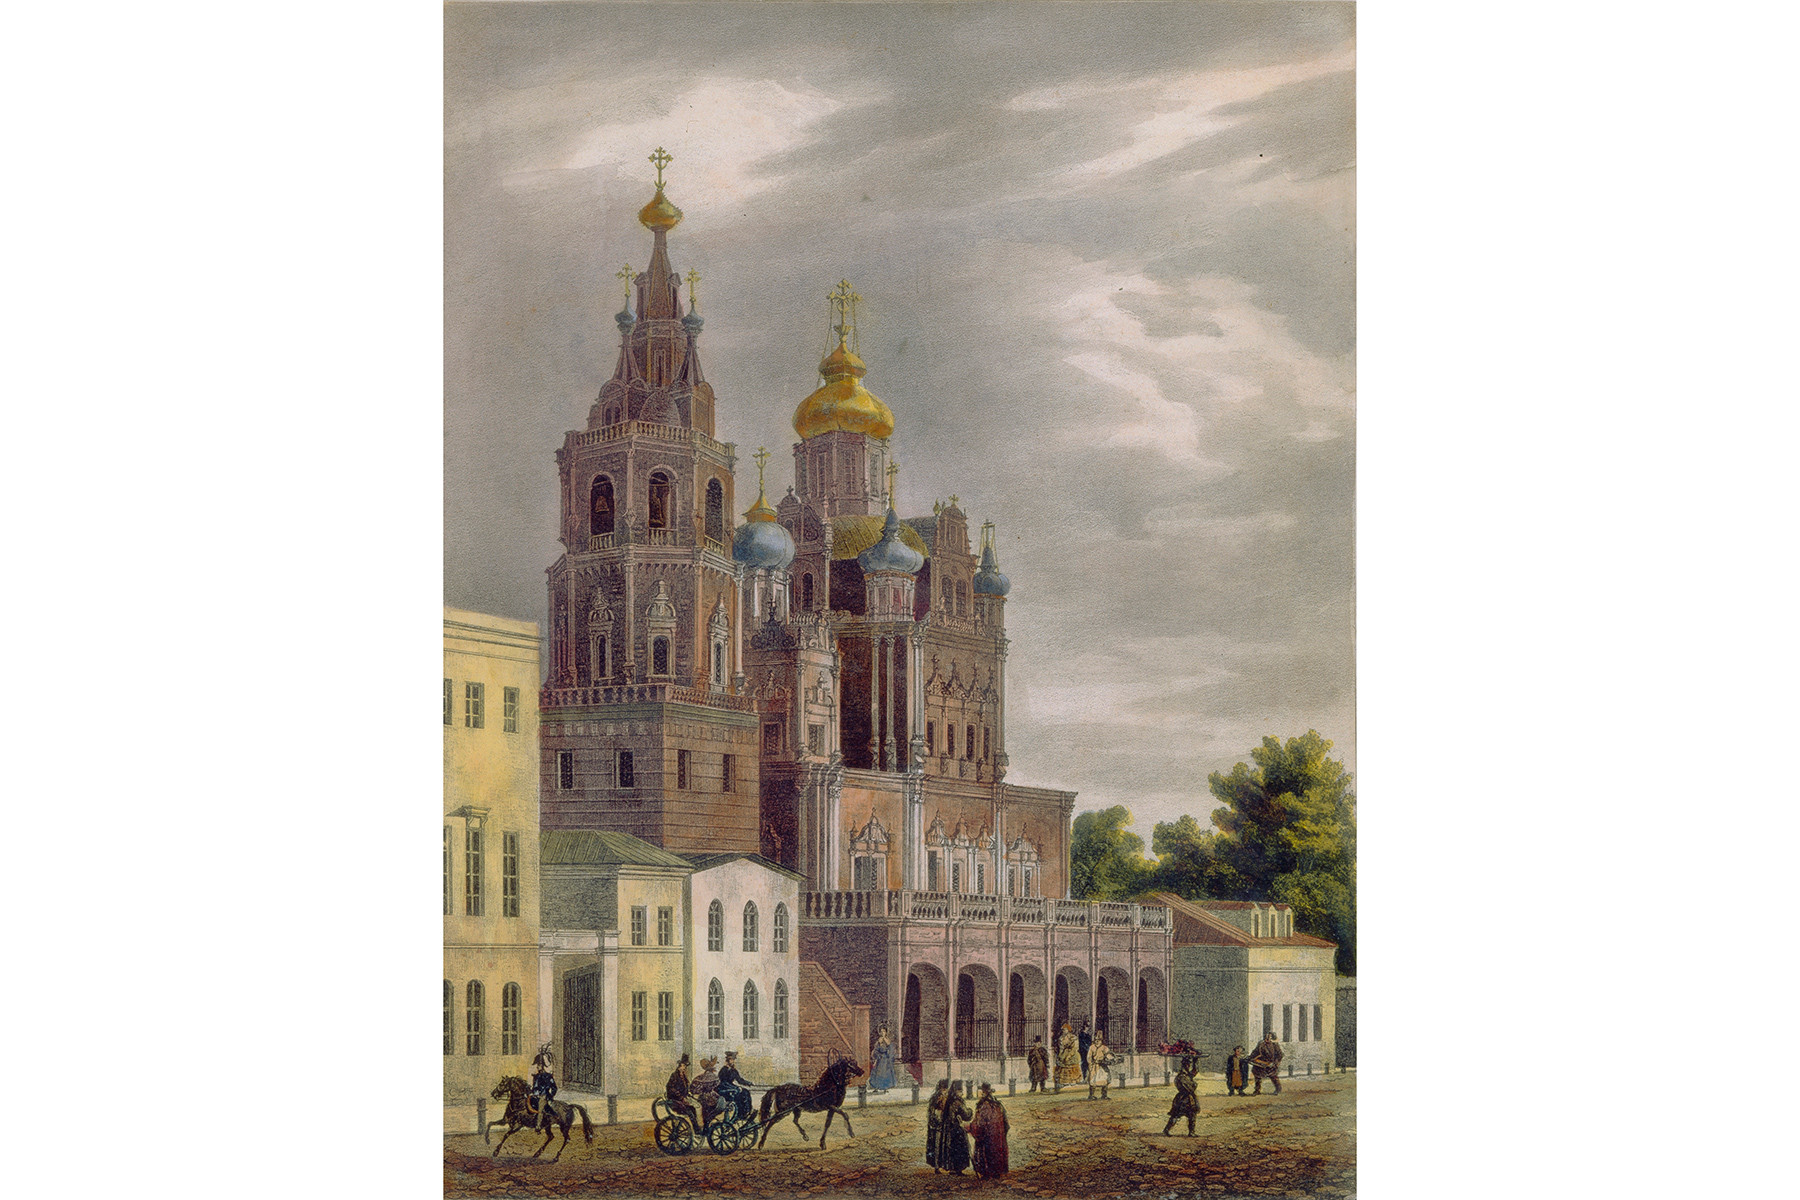 The Church of the Dormition of the Theotokos at the Pokrovka Street in Moscow, 1825.